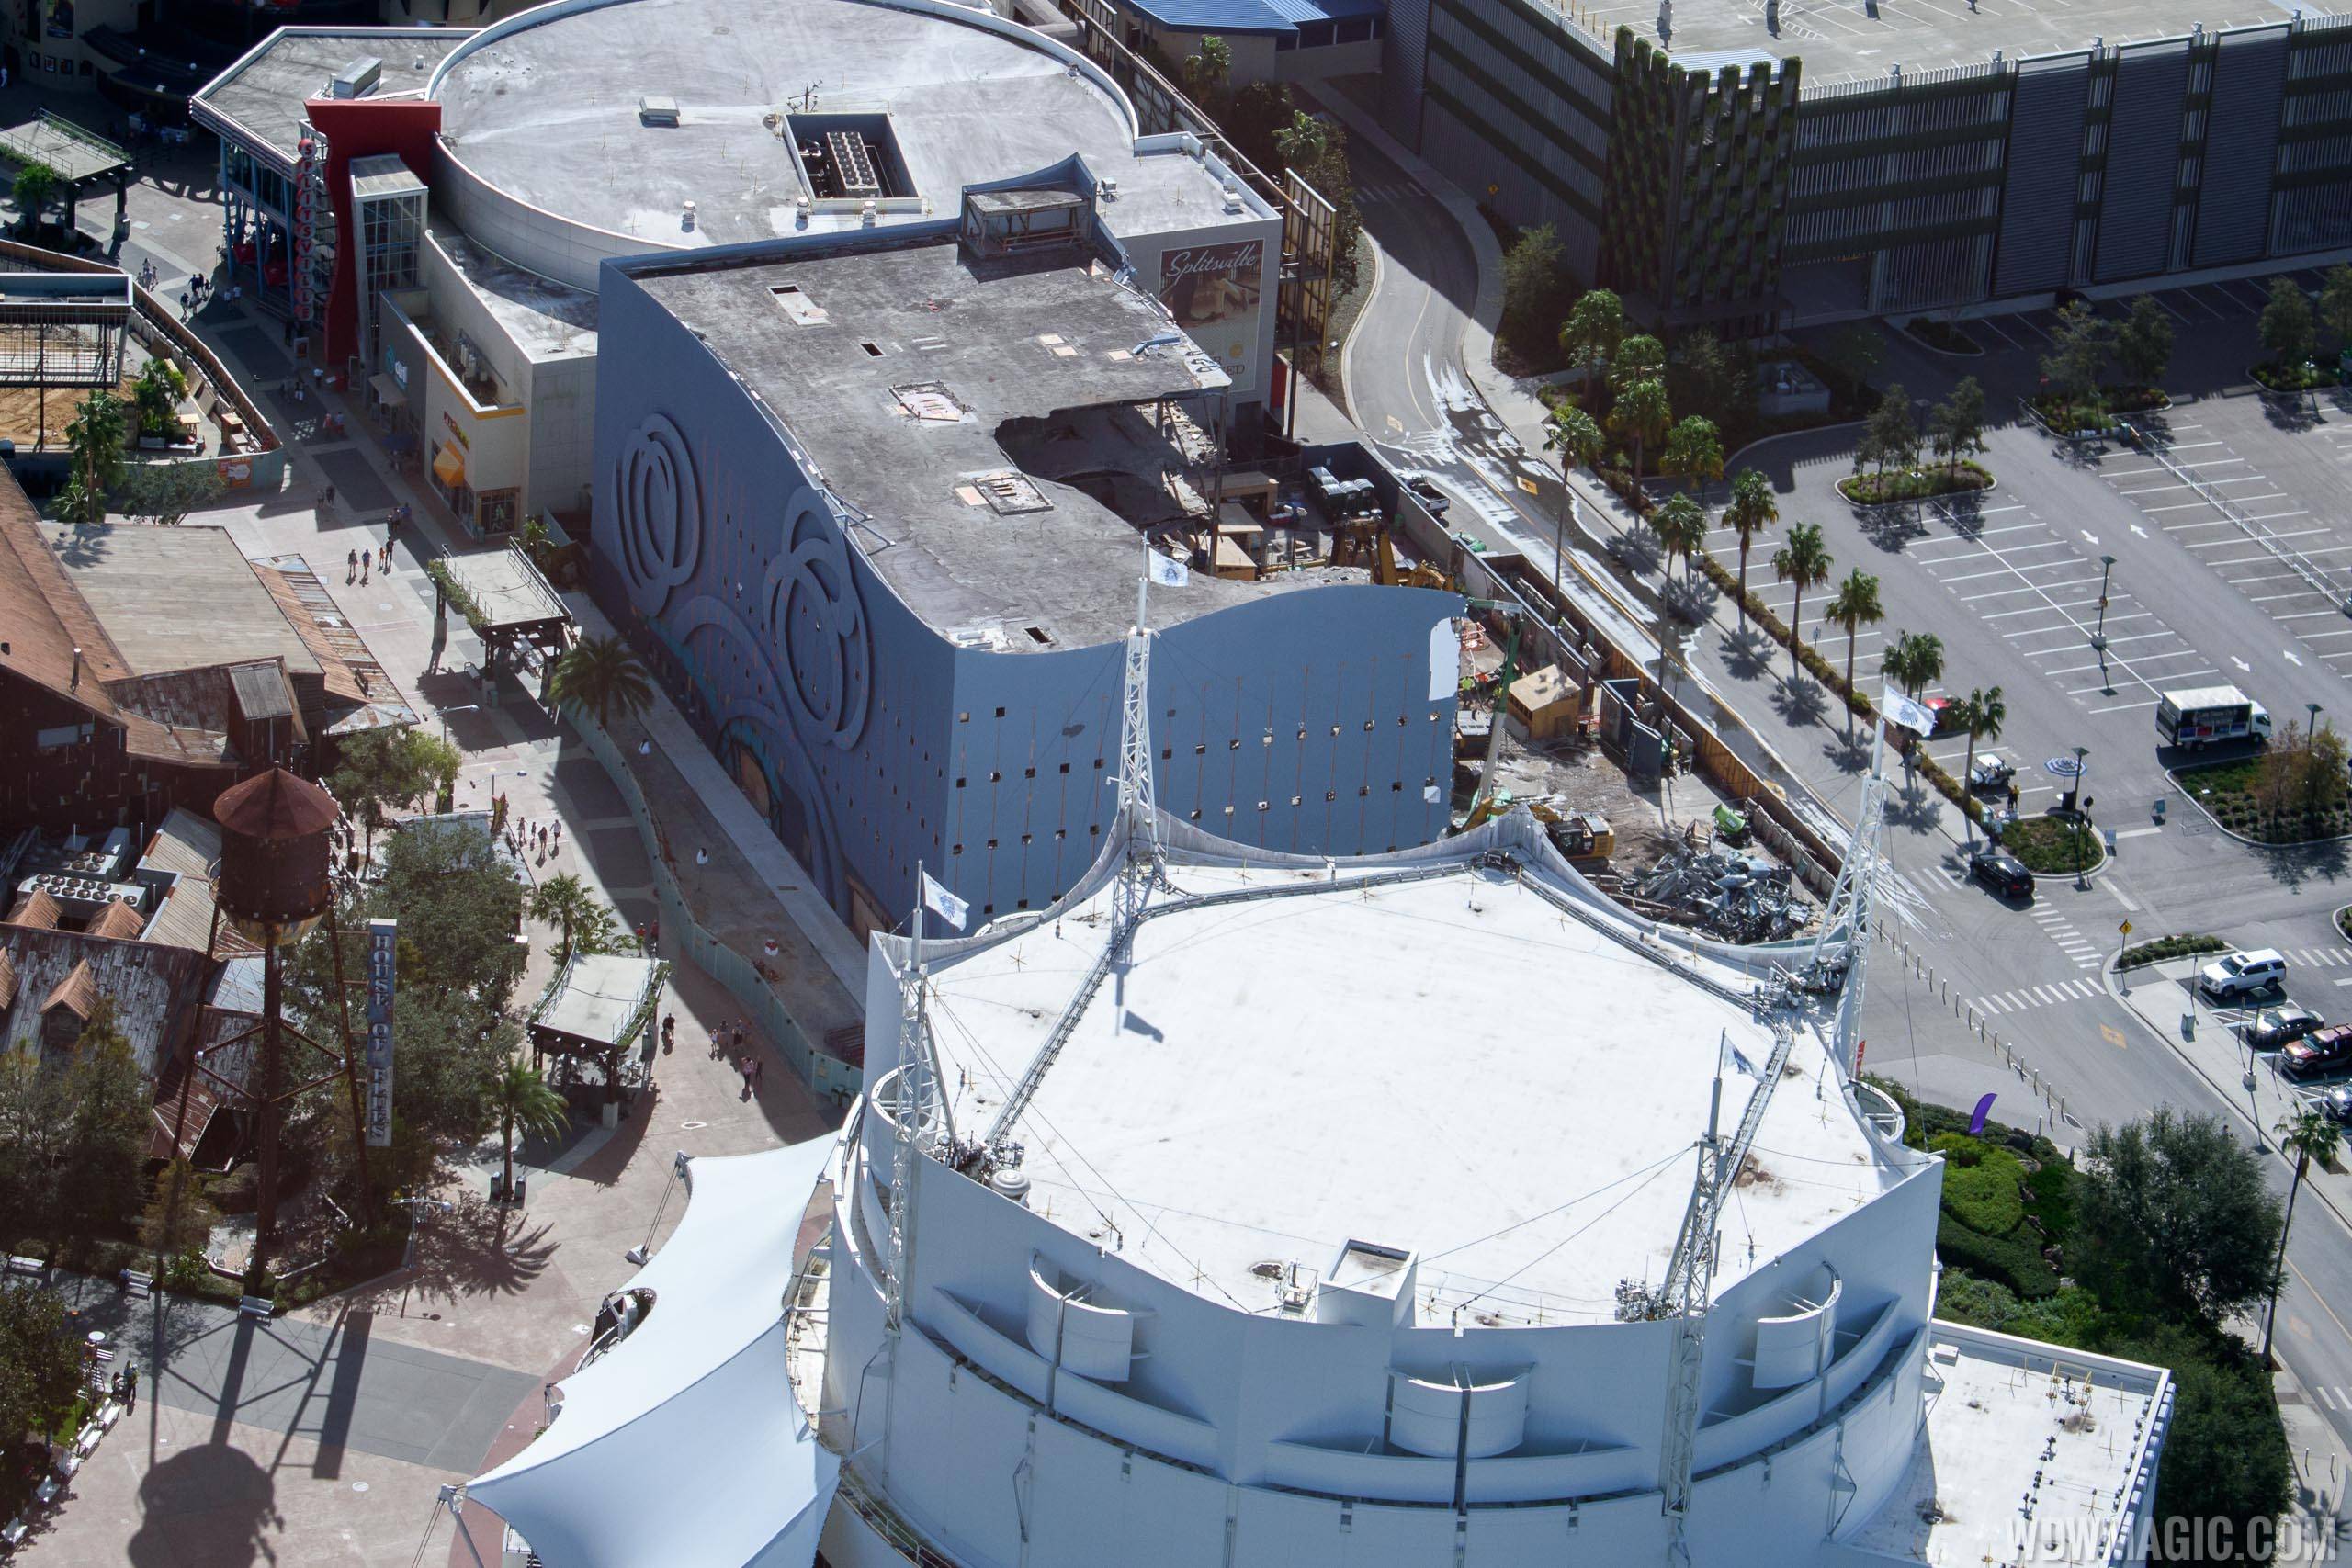 Disney Quest demolition from the air